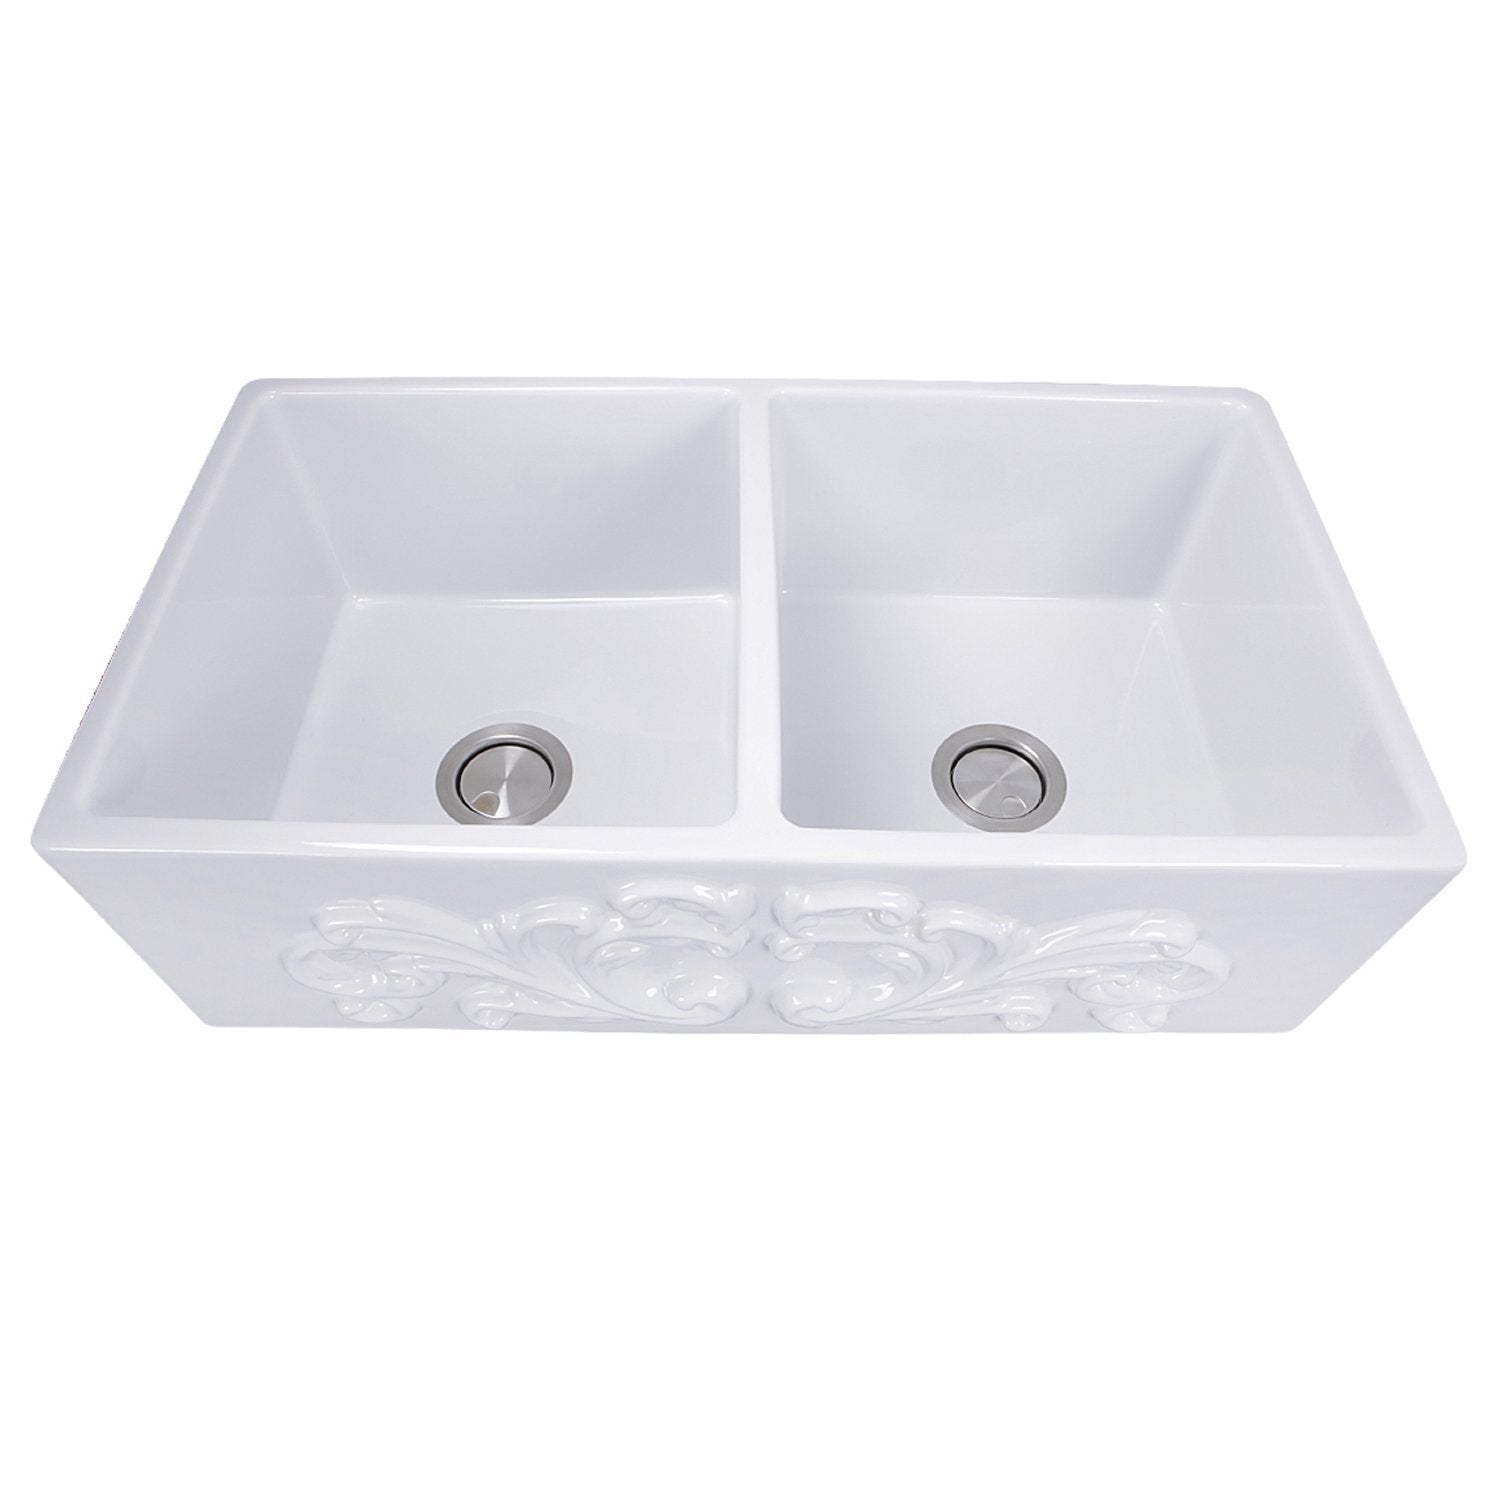 Nantucket Sinks Double Bowl Farmhouse Fireclay Sink with Filigree Apron